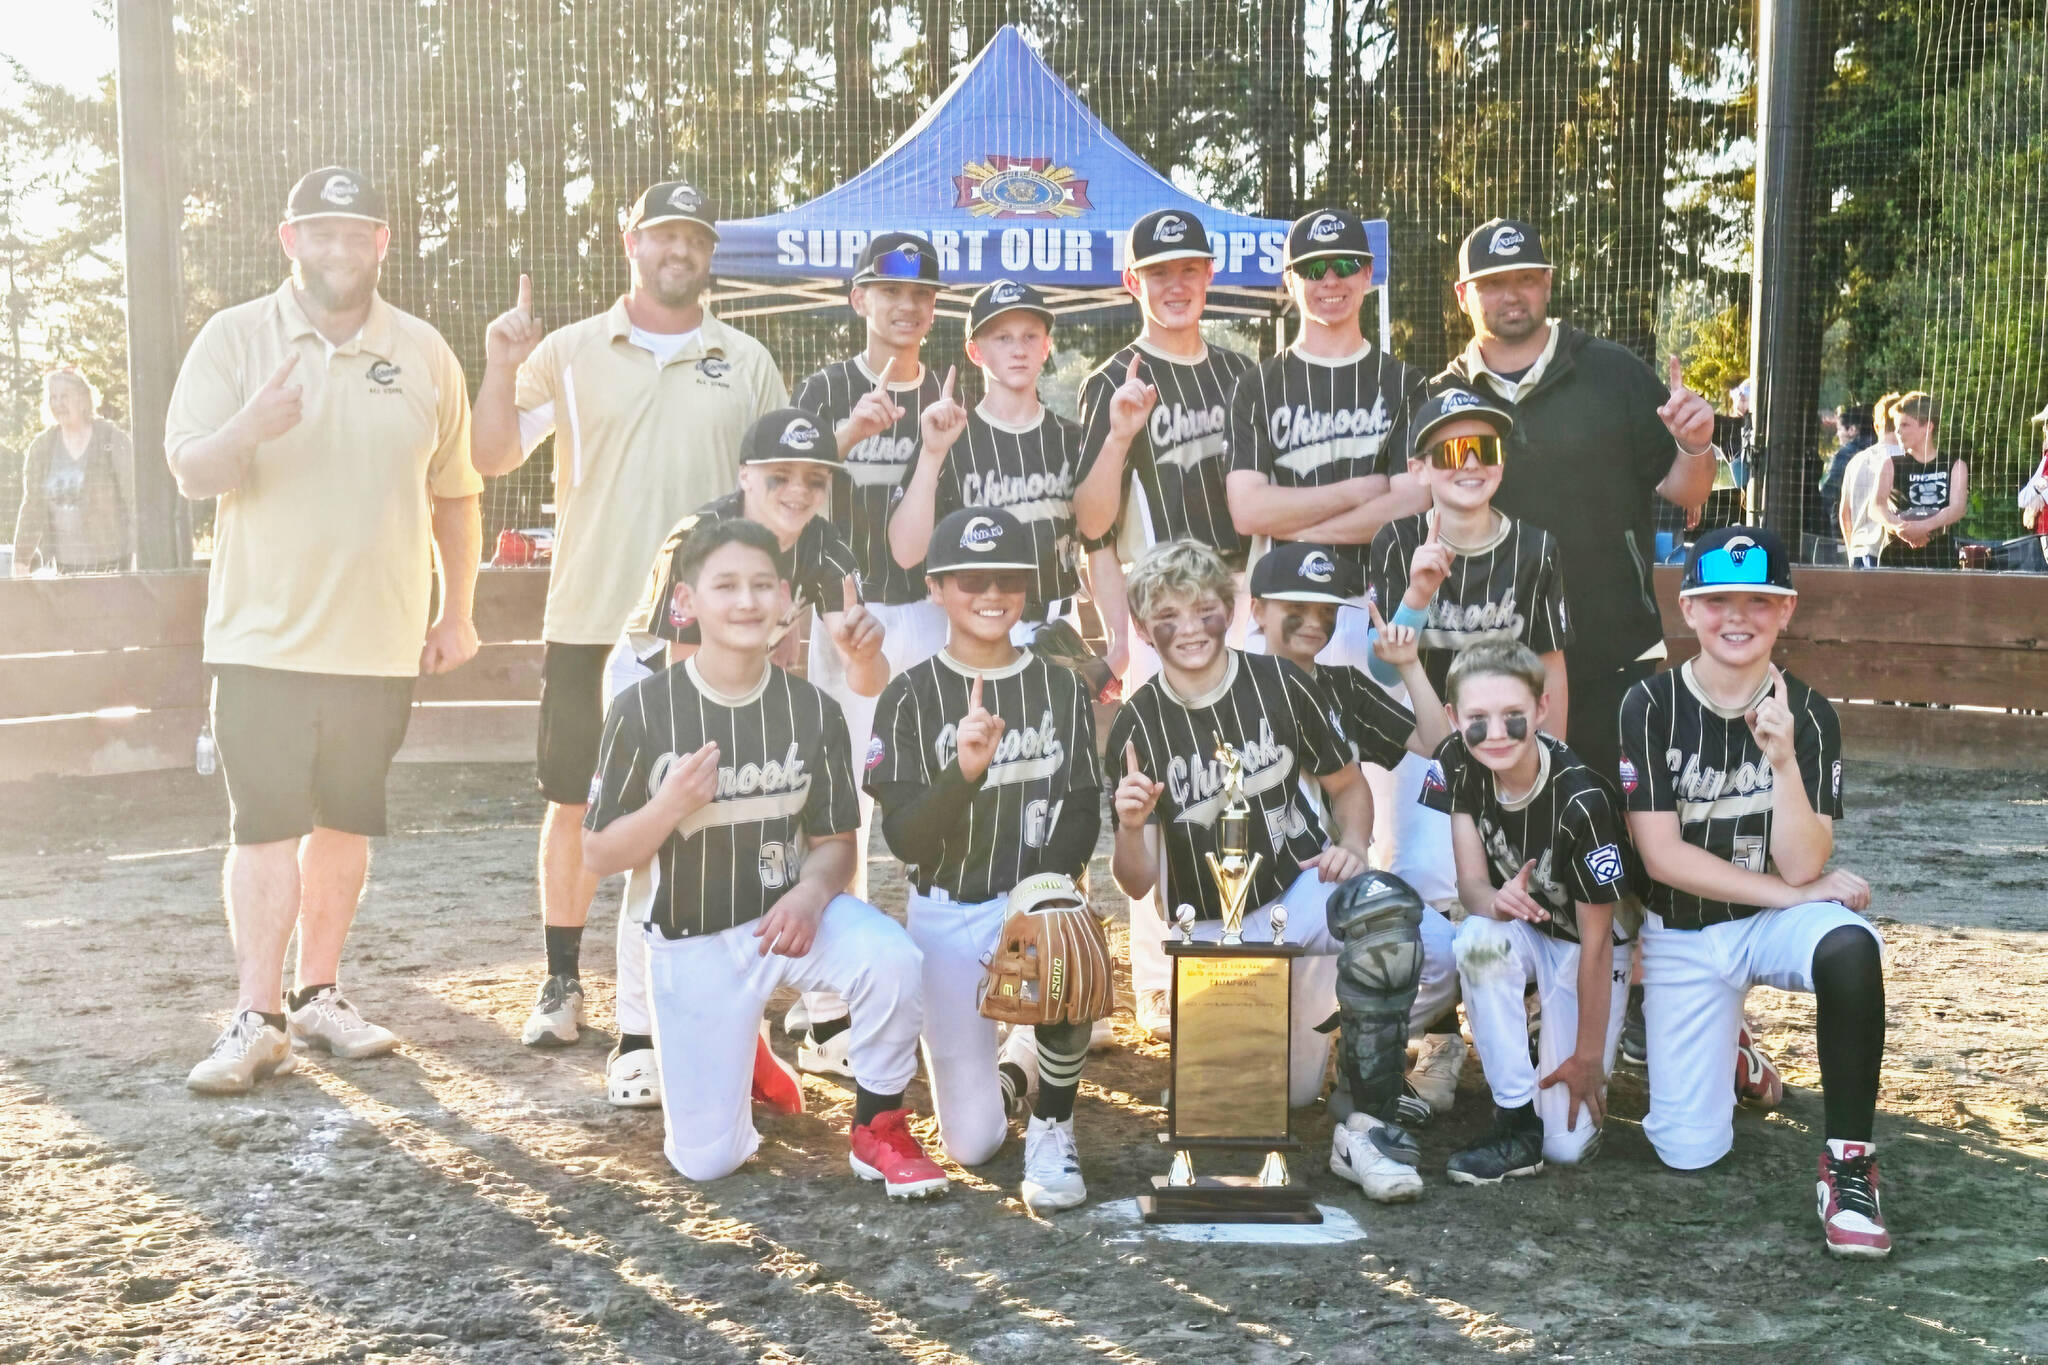 Contributed photo
The Chinook Little League team is heading to state next month.